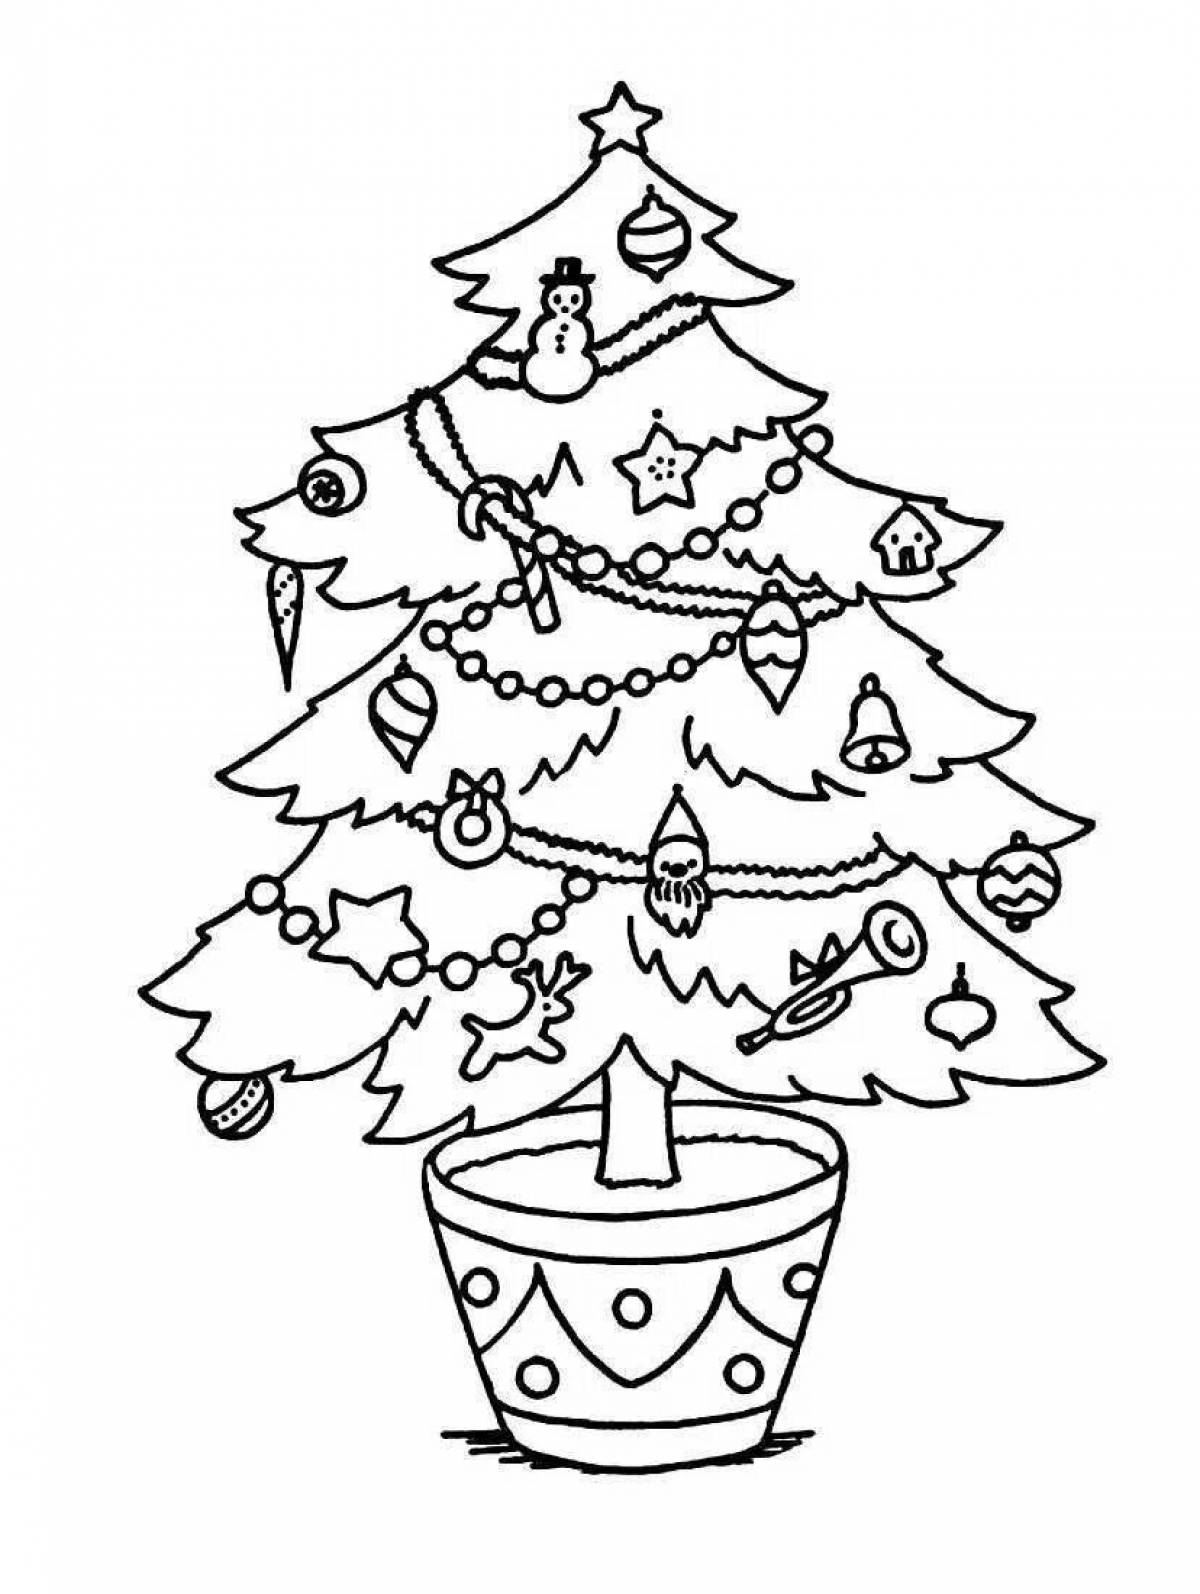 Playful big tree coloring page for kids